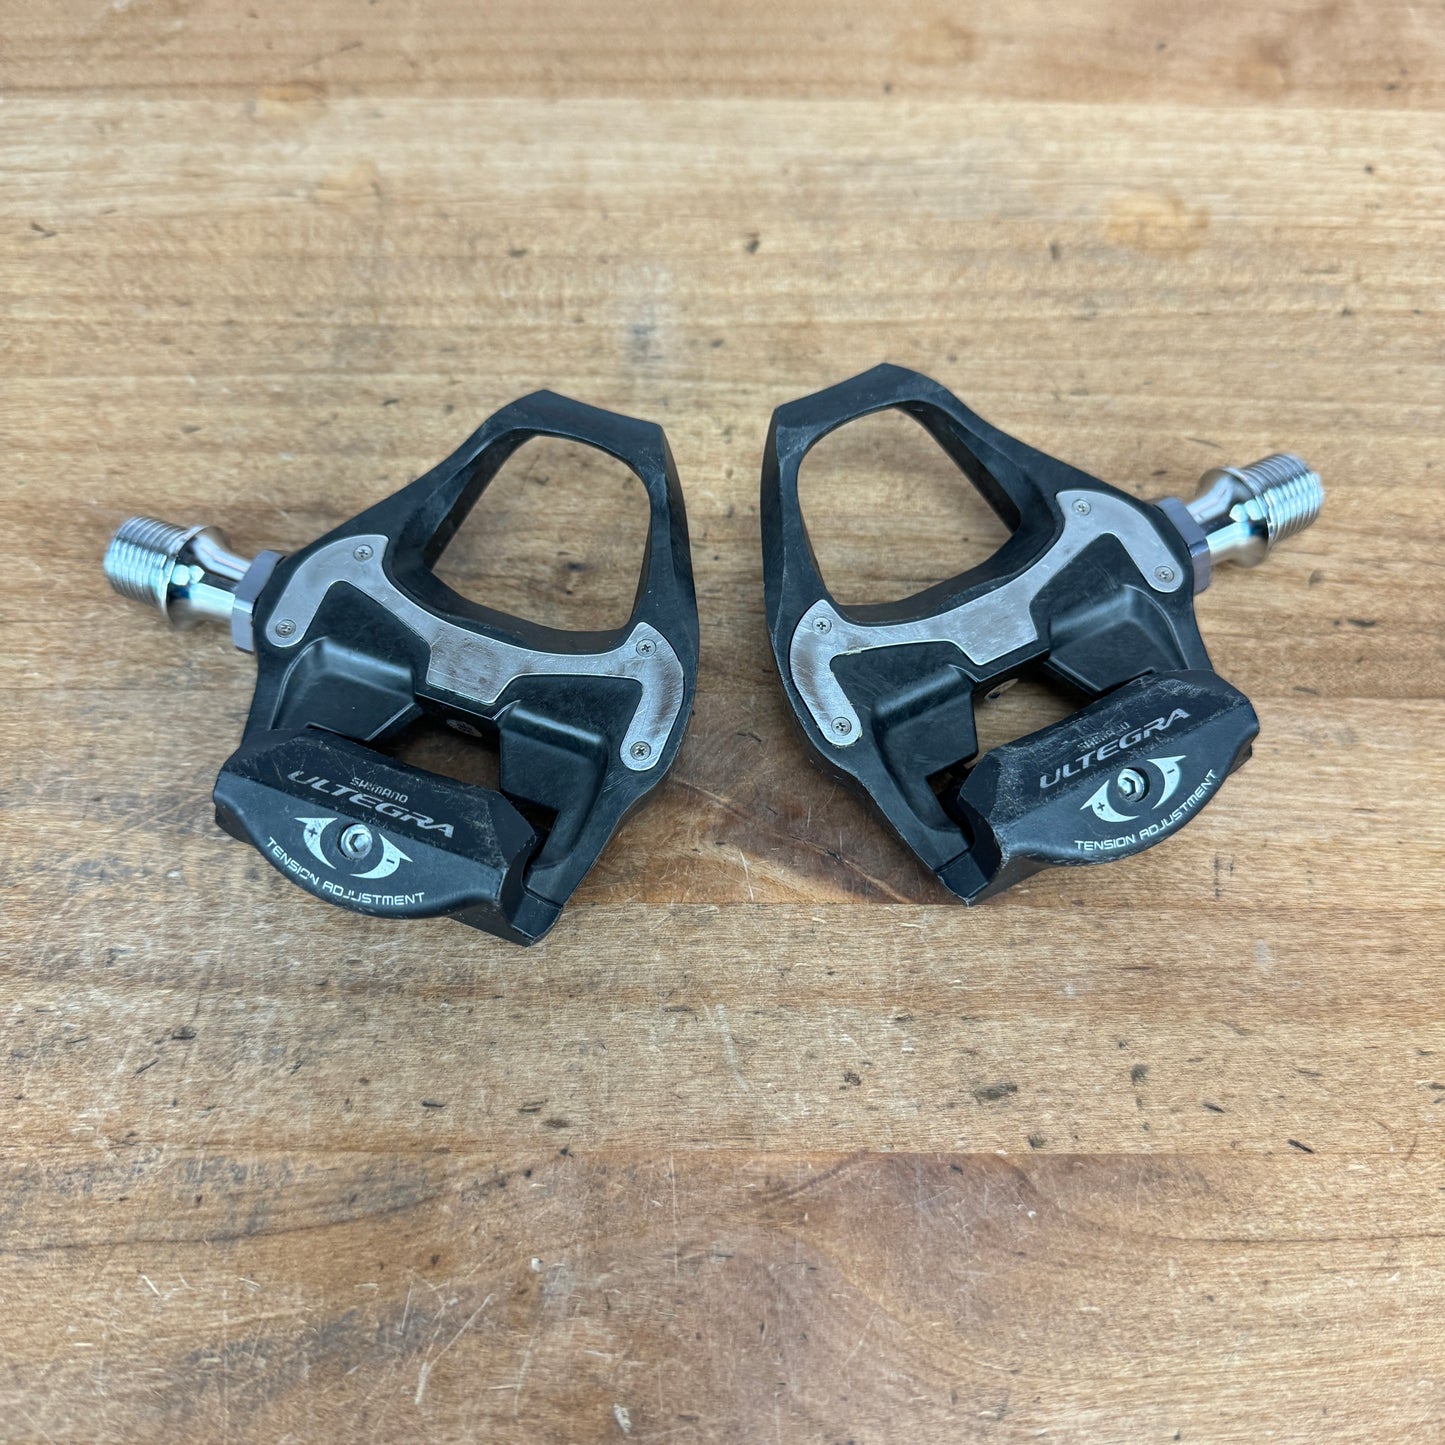 Shimano Ultegra PD-6800 Stainless Steel Spindle Clipless Bike Pedals 258g